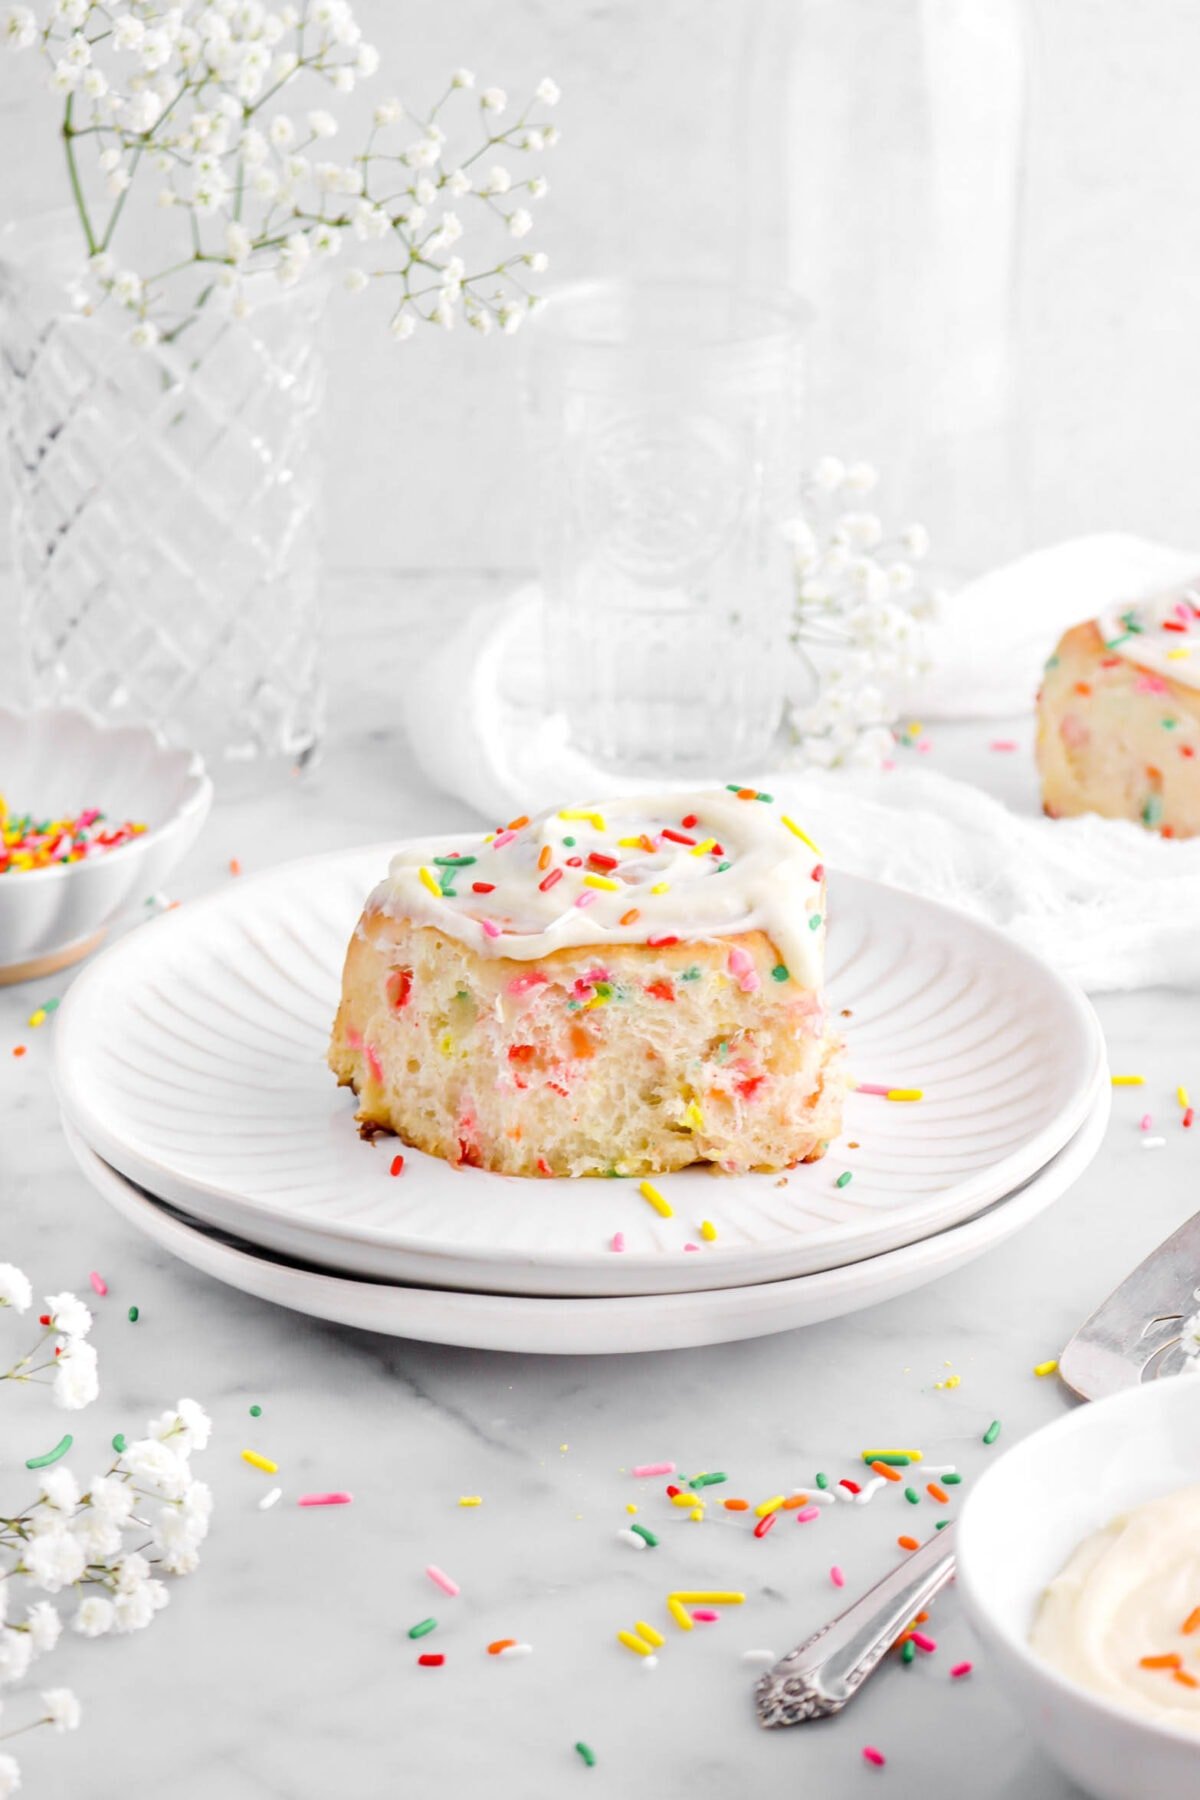 frosted cinnamon roll on two stacked white plates with empty glasses, a bowl of rainbow sprinkles, and another cinnamon roll behind, with white flowers and rainbow sprinkles around on marble surfce.